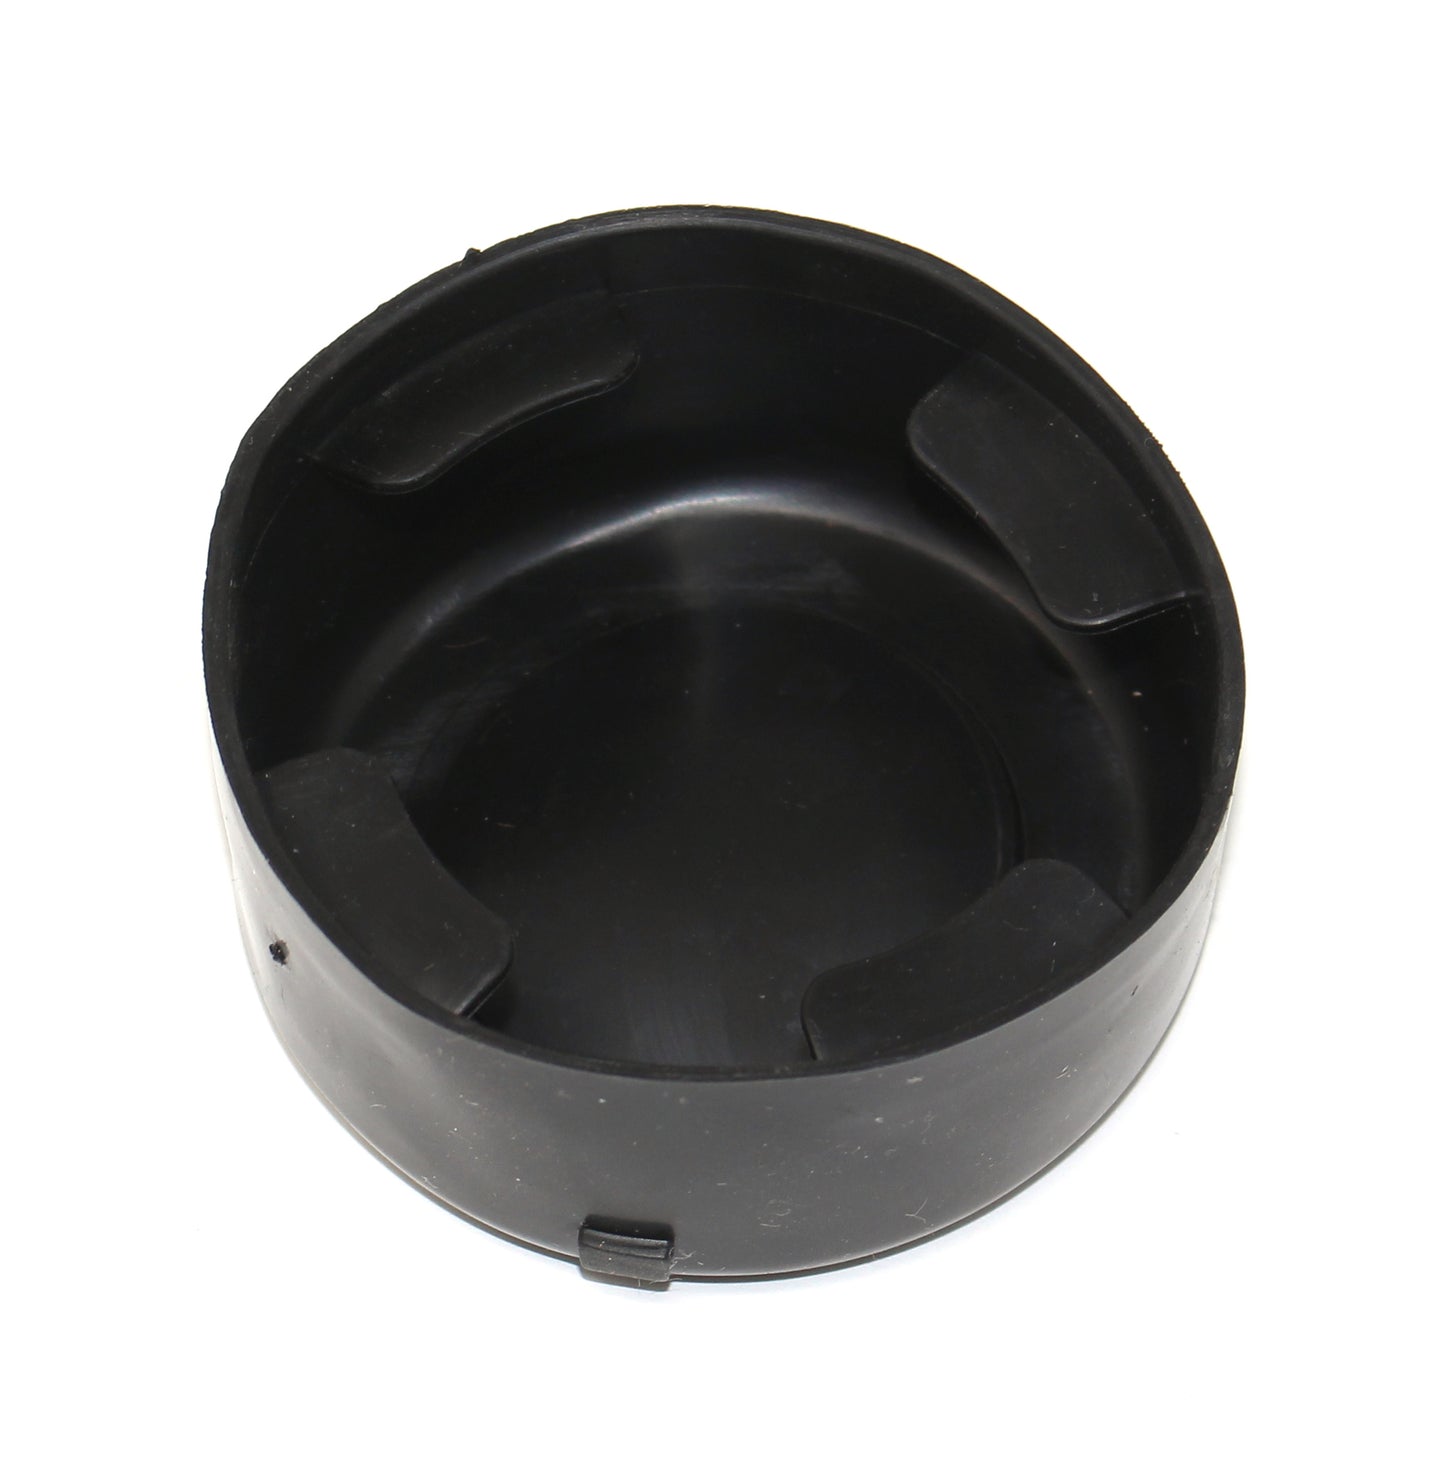 JSP Aftermarket 41000 Cup Holder Insert 3" Compatible with Buick, Chevrolet, GMC, and more.